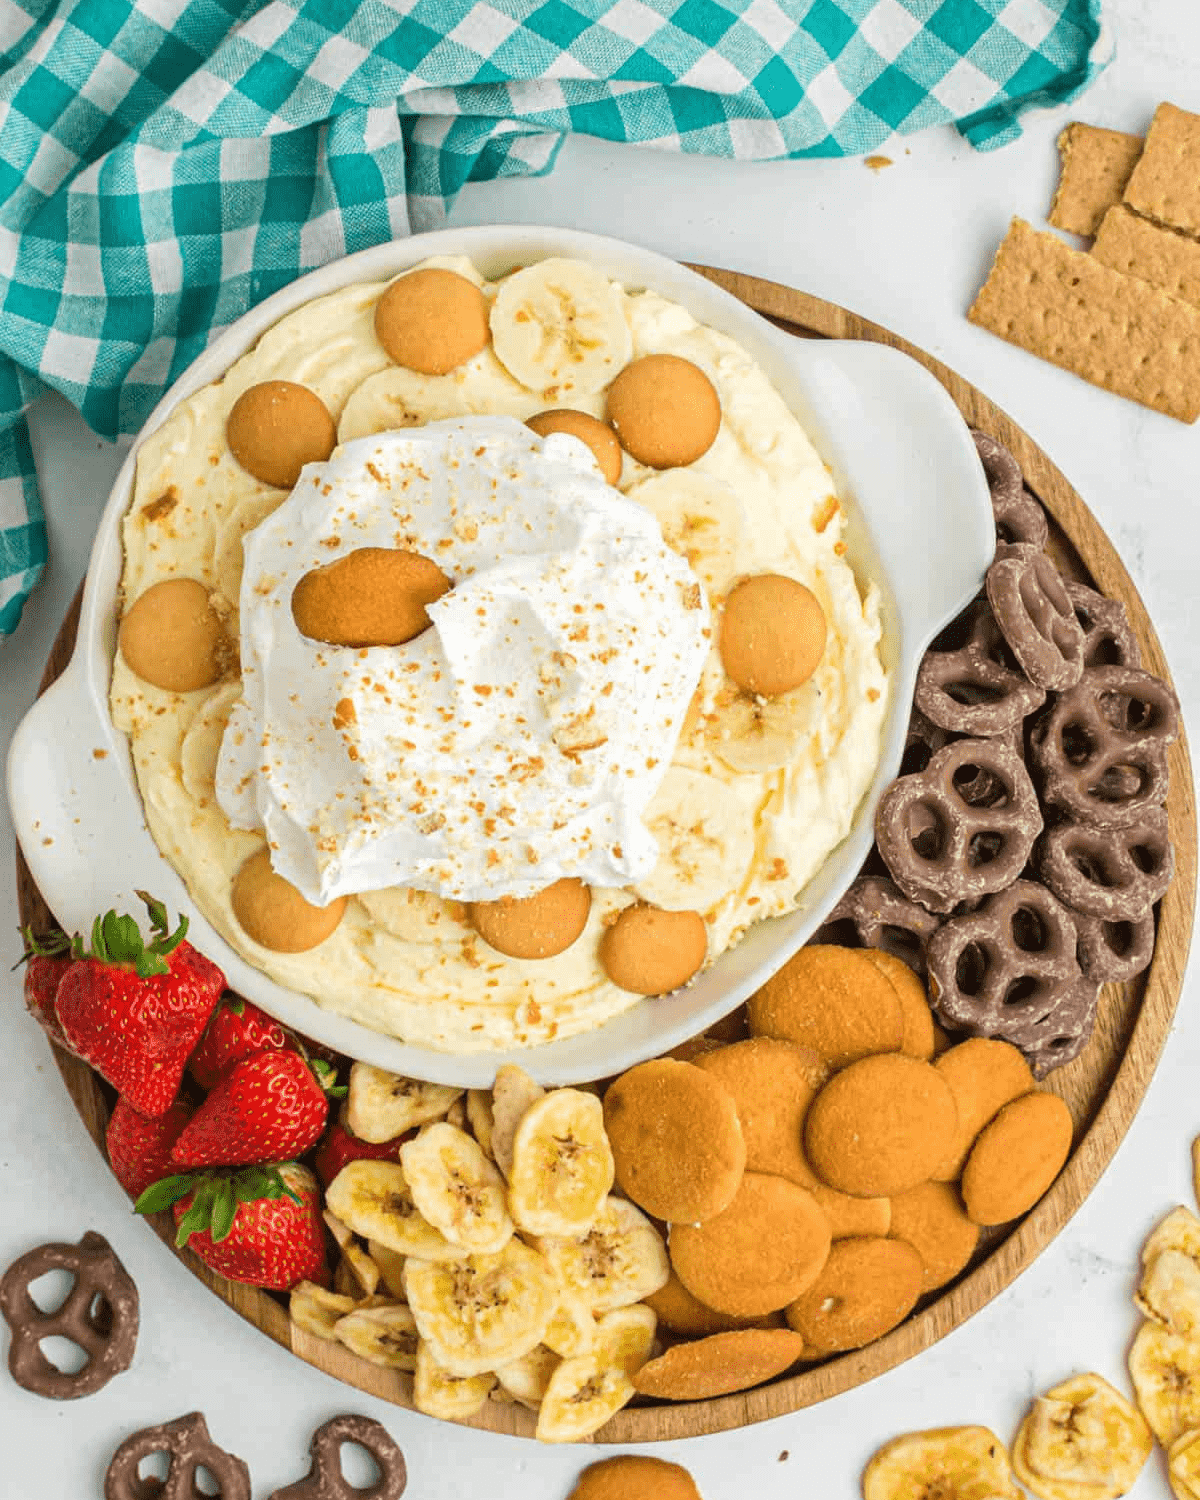 Banana pudding dip with wafers, fruit and pretzels
